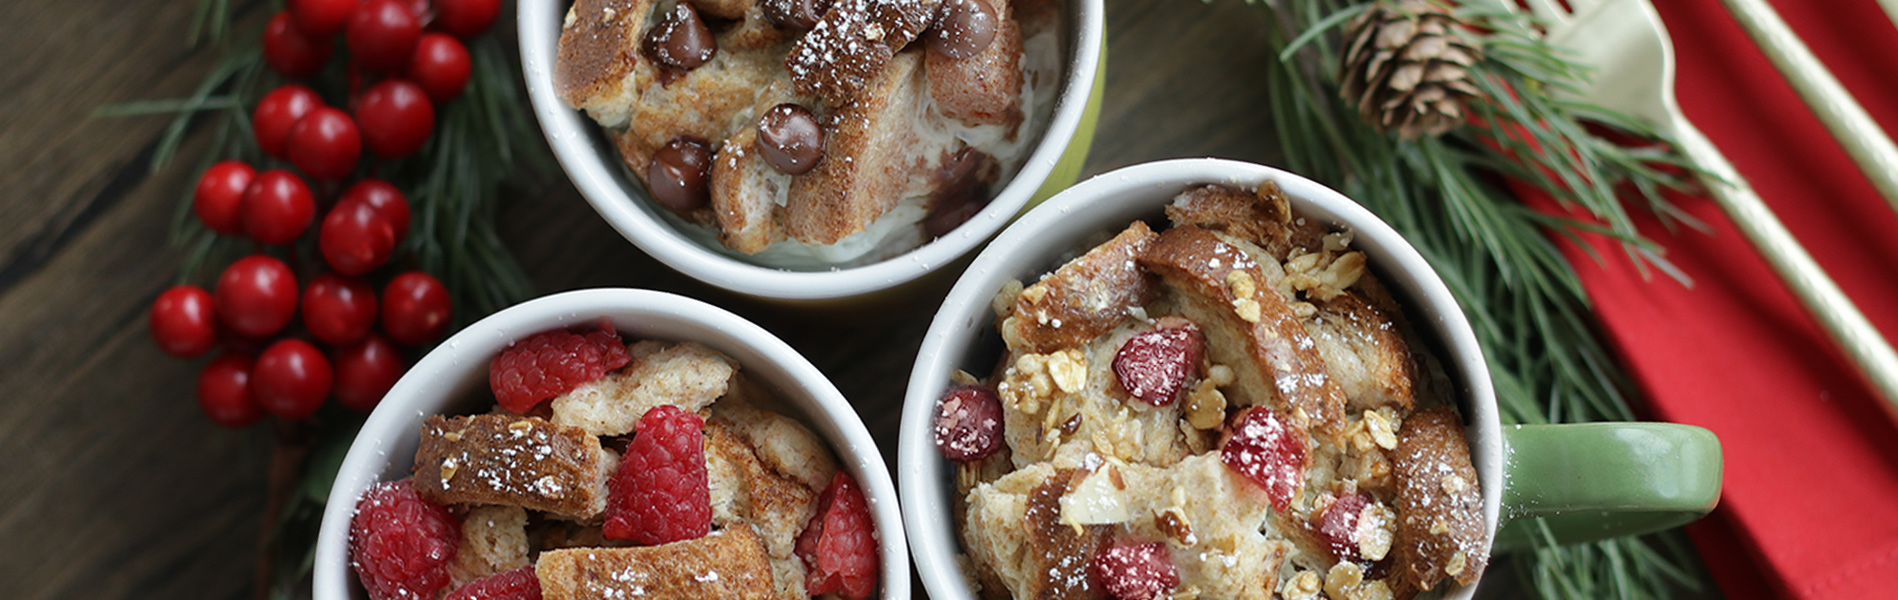 Pesonalized bread pudding made in a mug using Sara Lee Butter Bread